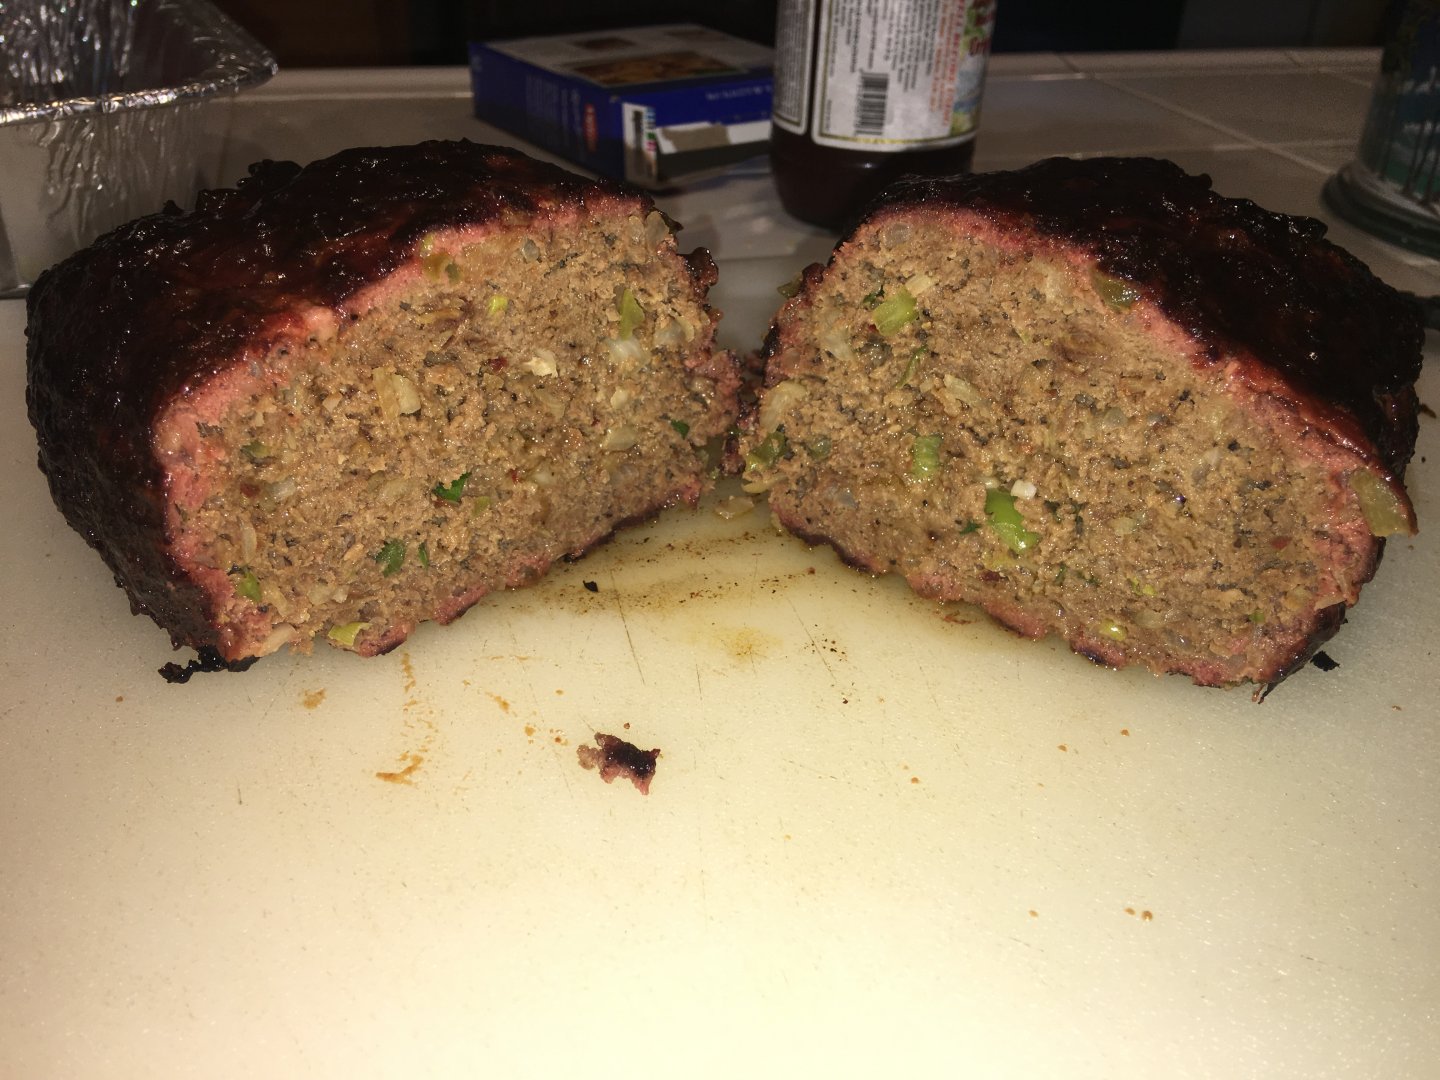 How Long To Cook A 2 Pound Meatloaf At 325 Degrees - How ...